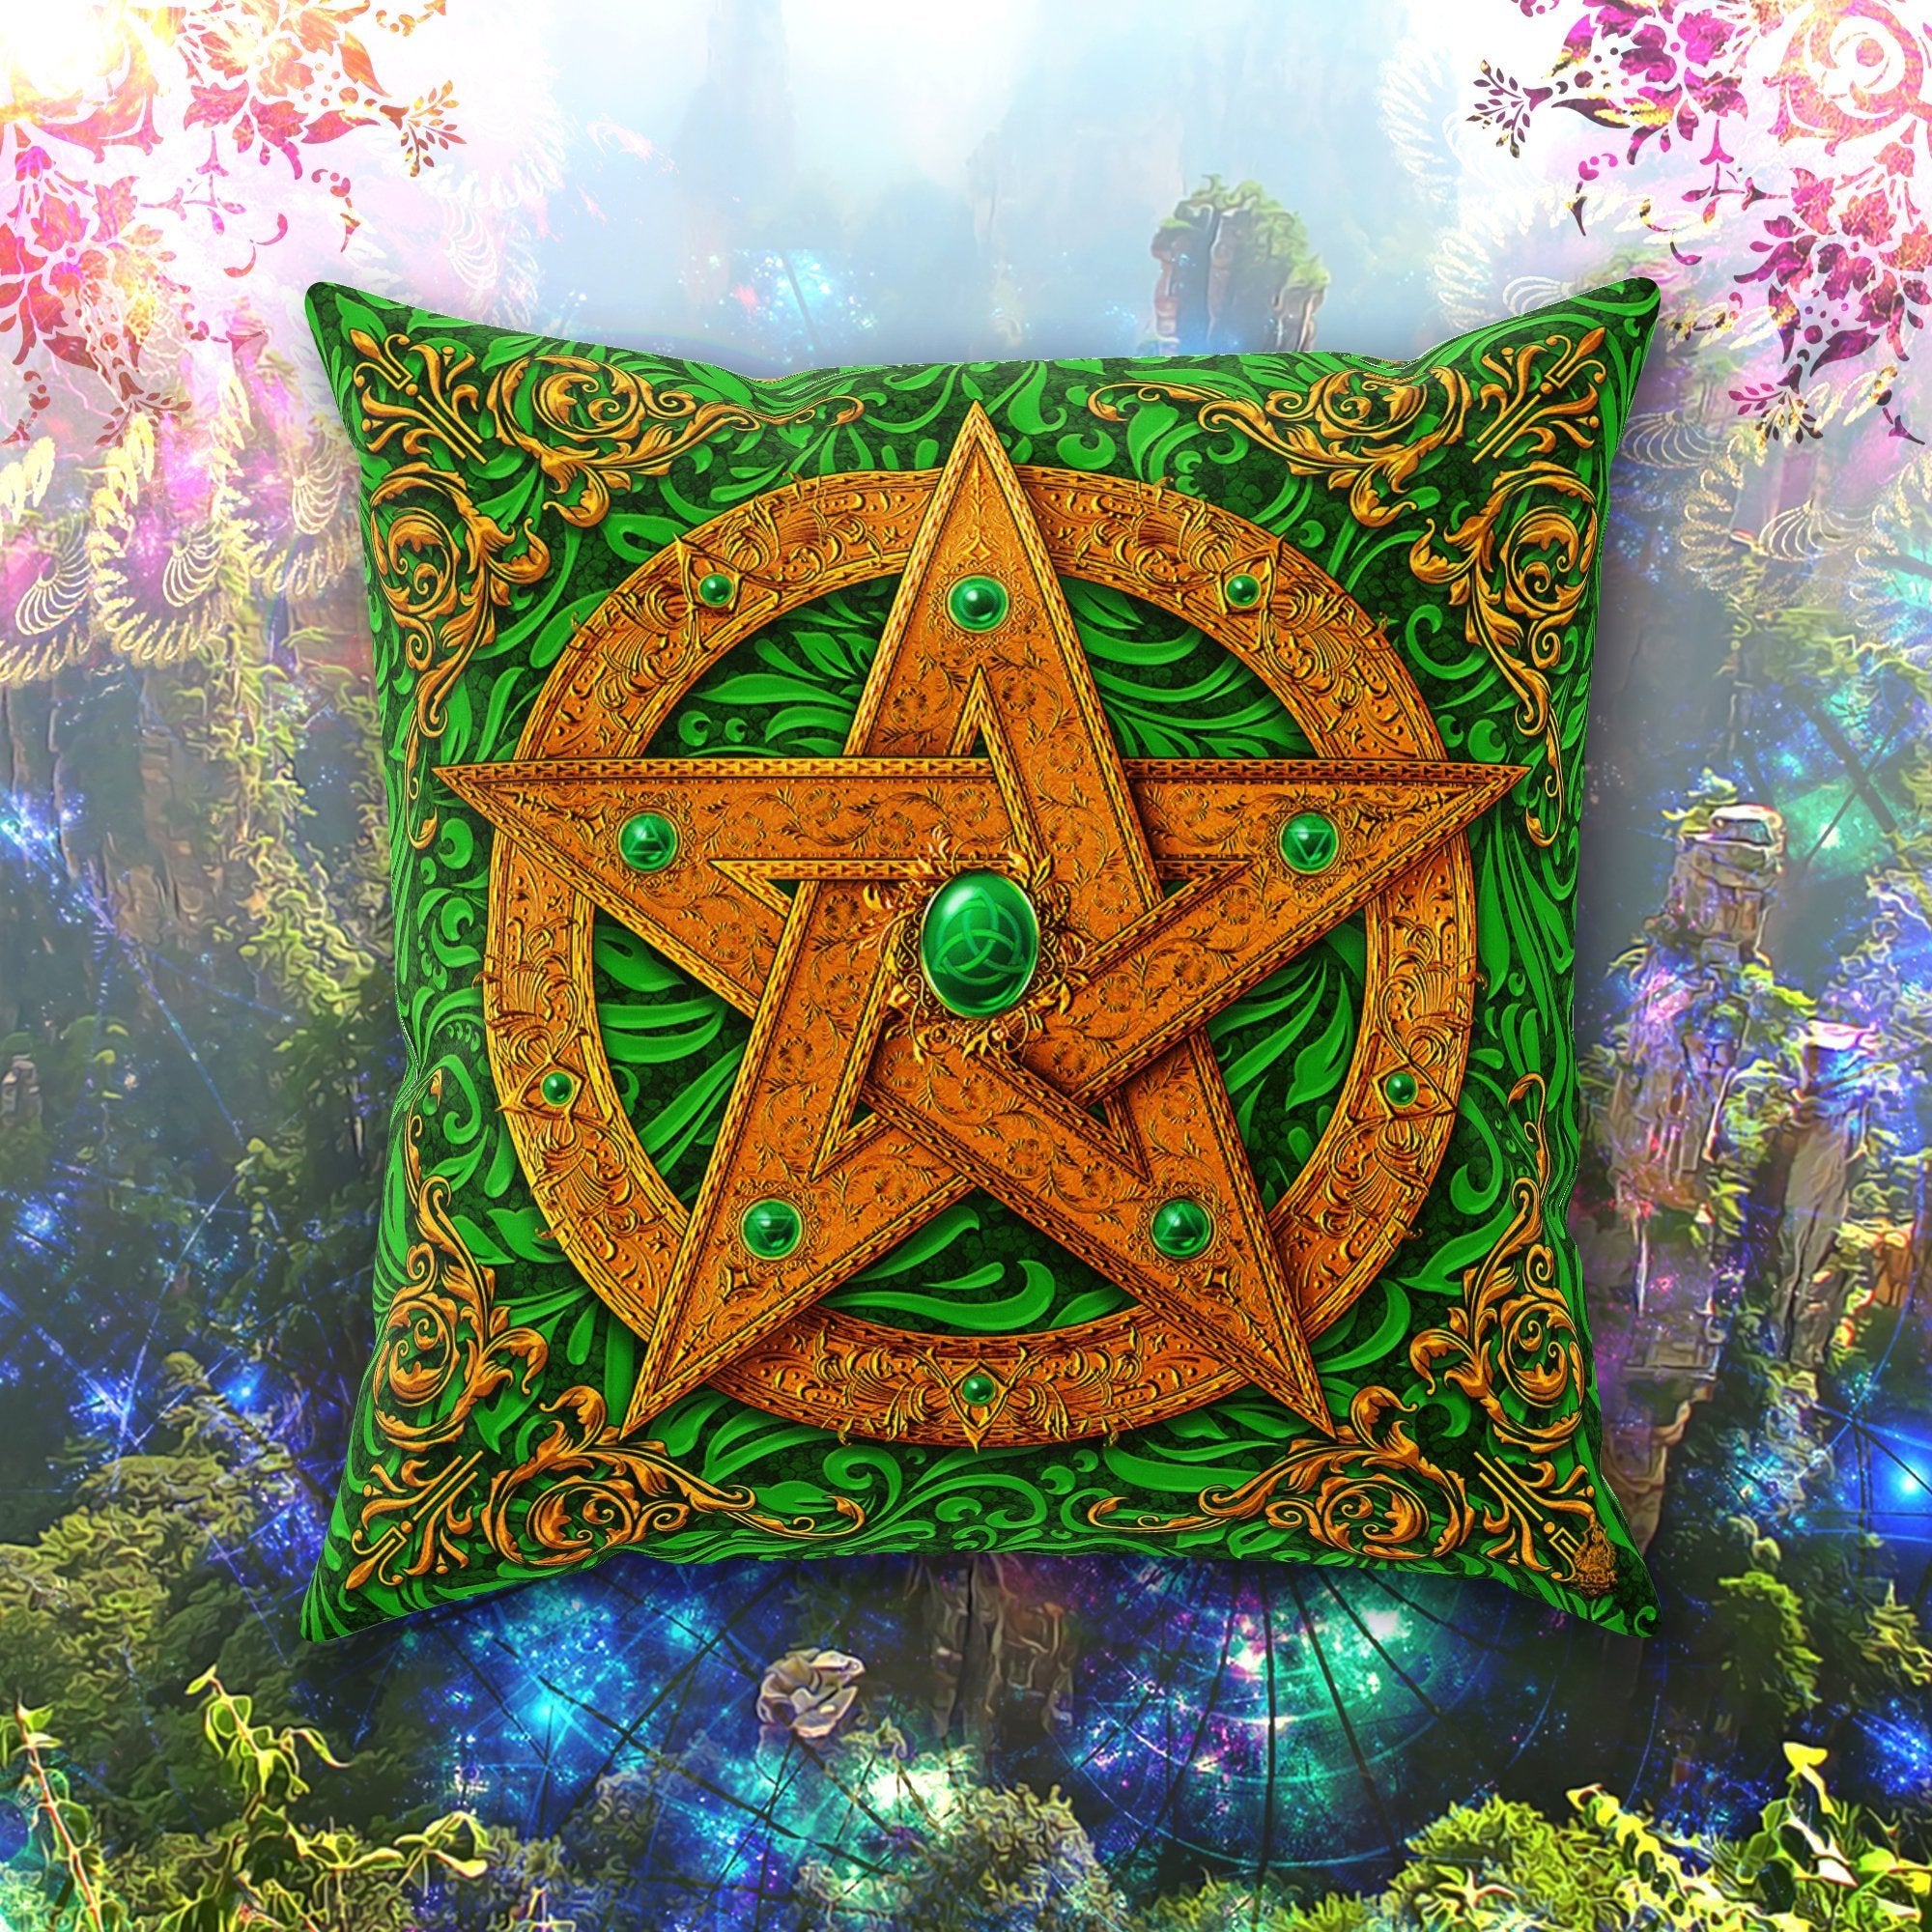 Pentacle Throw Pillow, Decorative Accent Cushion, Wiccan, Witch Decor, Pagan Art, Funky and Eclectic Home - Green - Abysm Internal